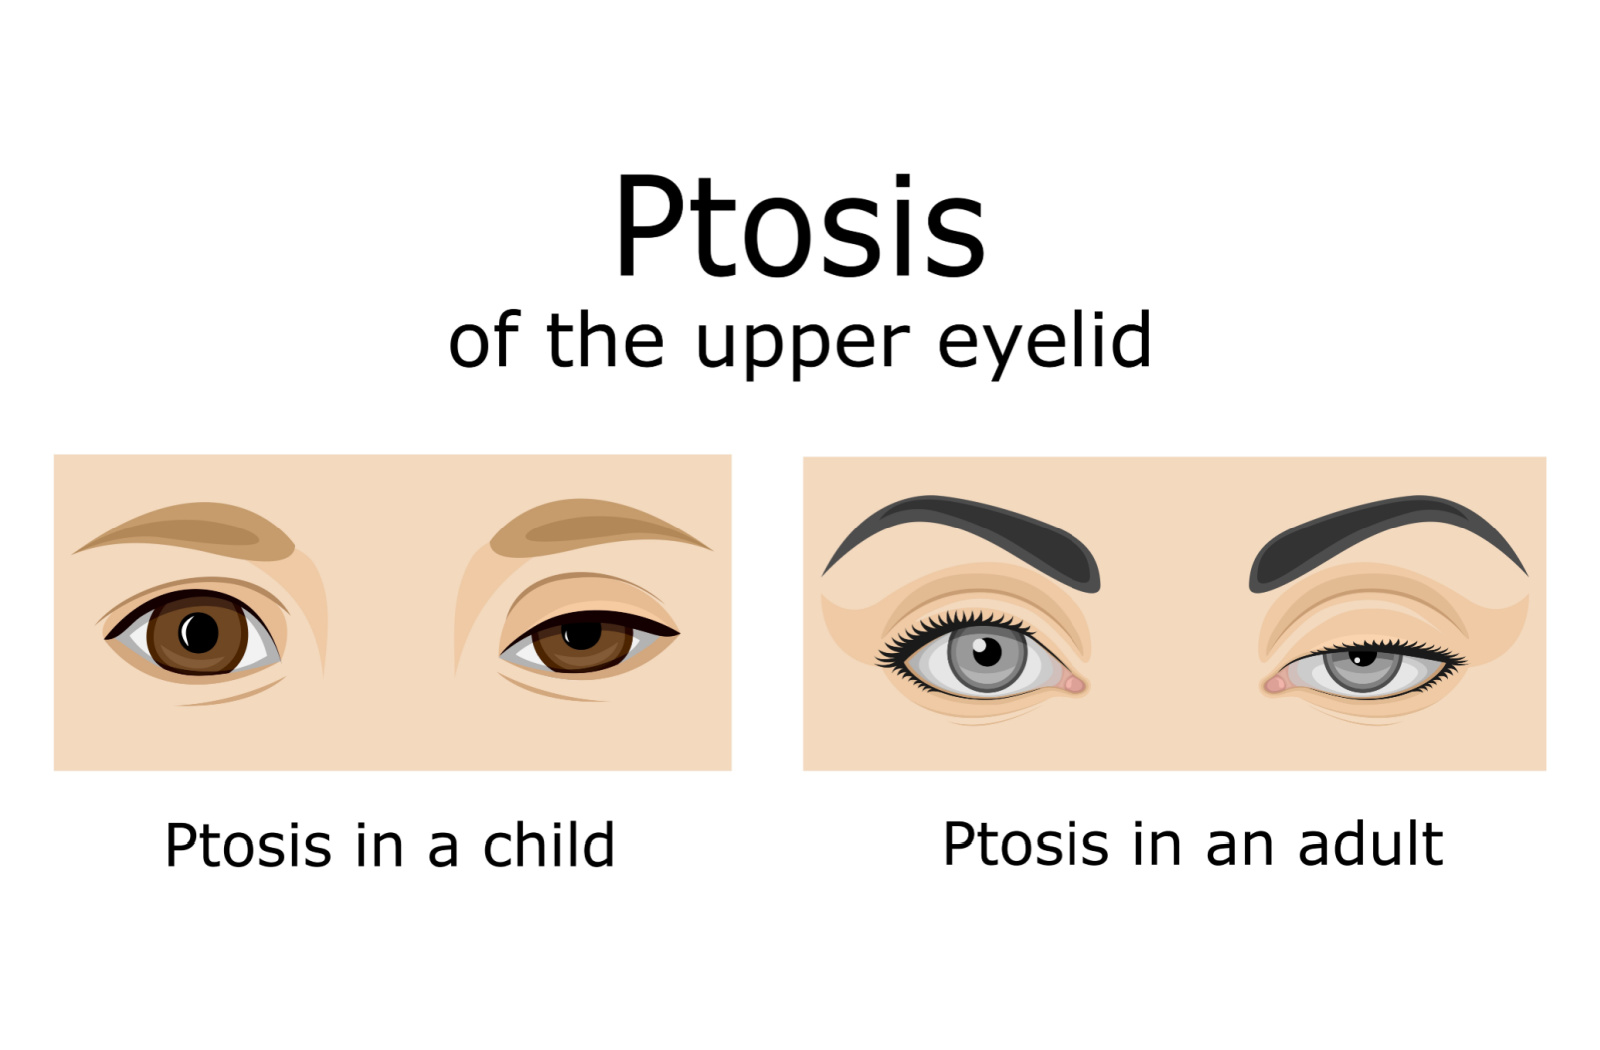 Drawn image showing ptosis of the upper left eyelid in both a child and adult.